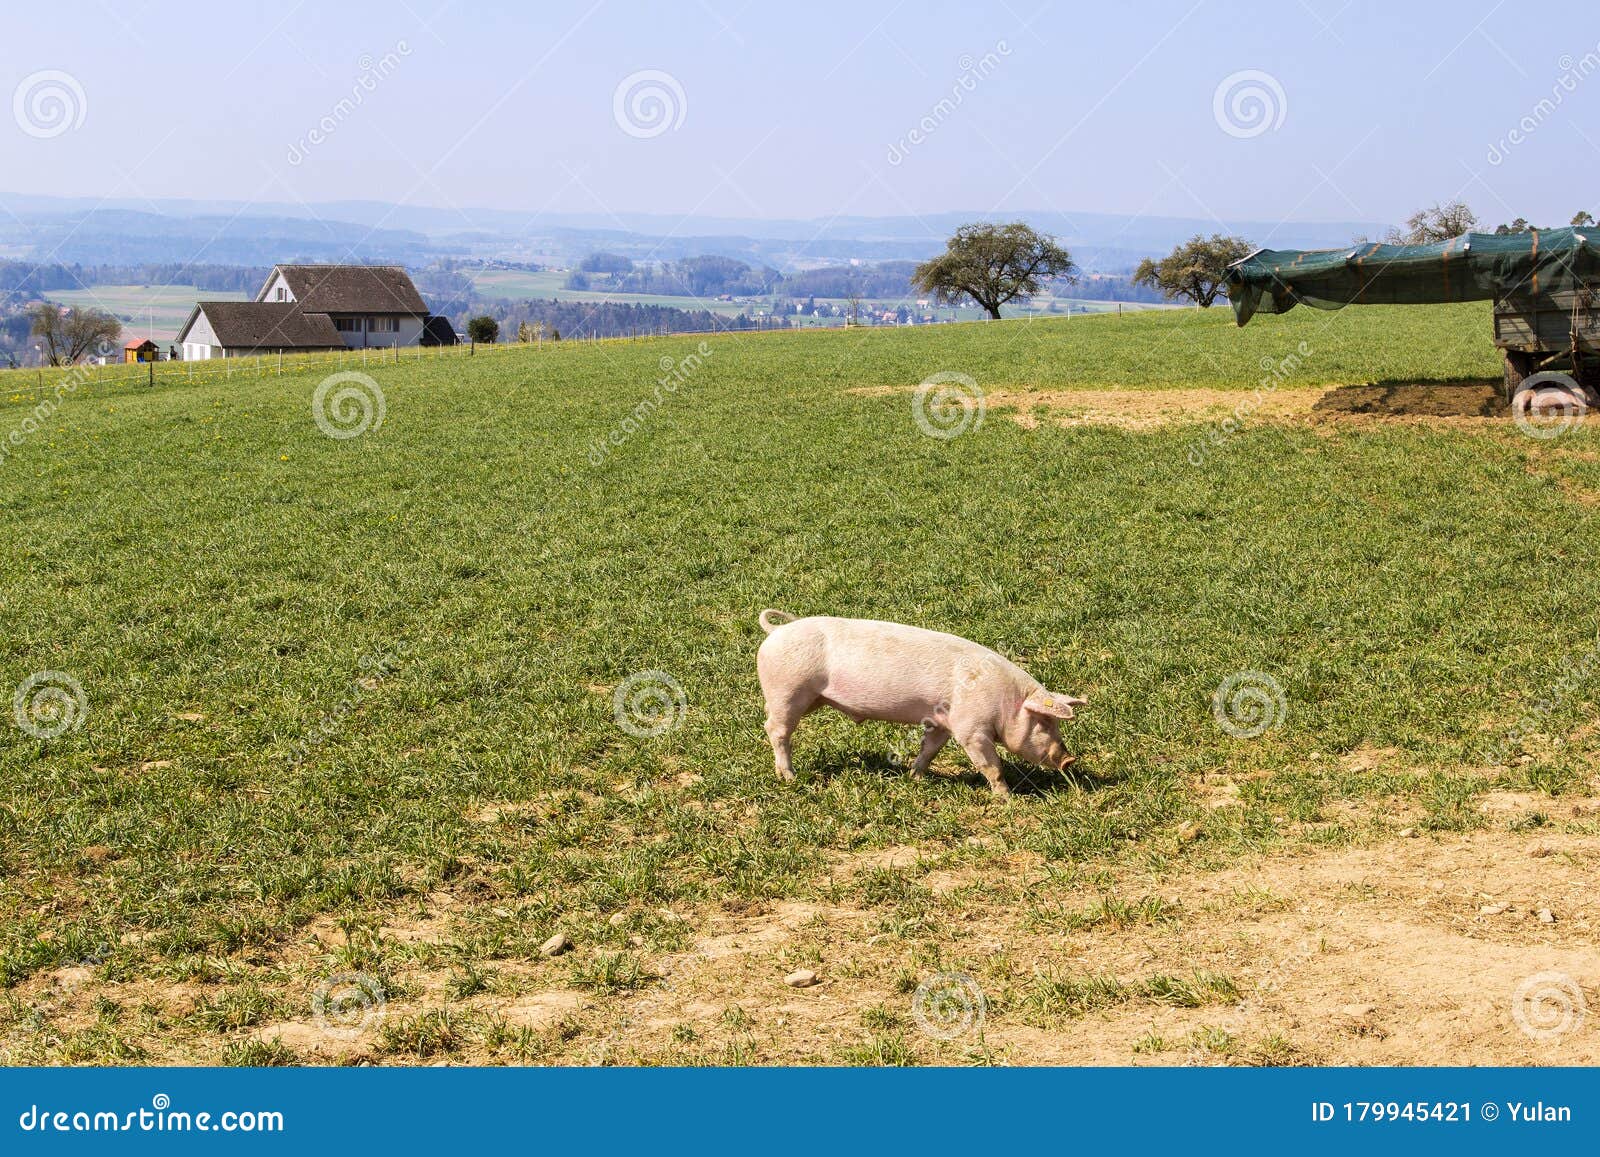 A small pig walking in open land pig farm - field-grown pigs are healthy agricultural products